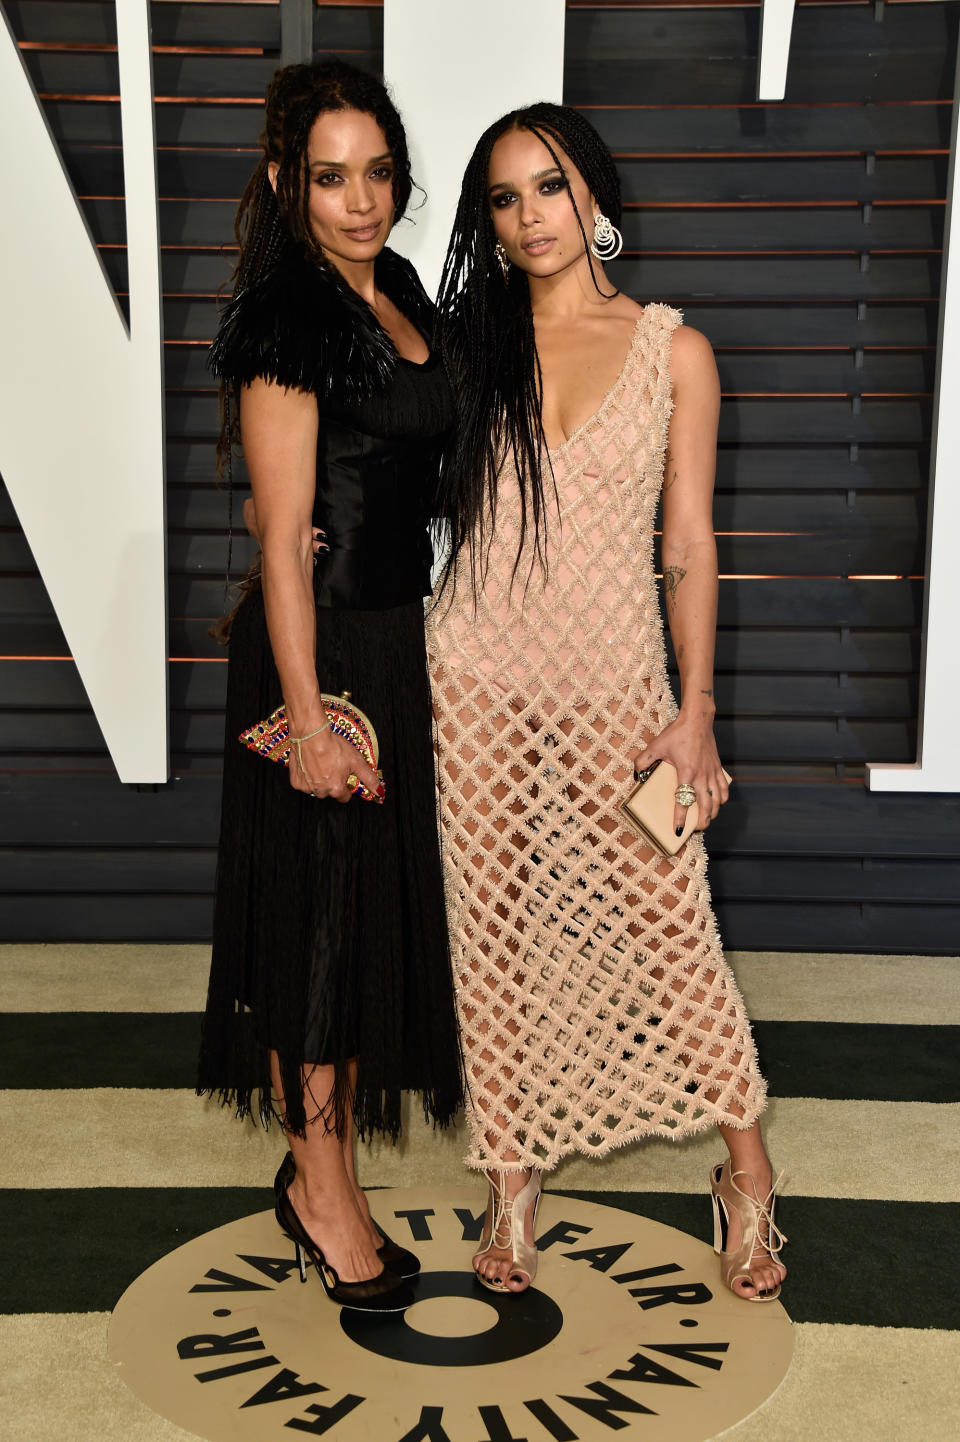 Actresses Lisa Bonet and Zoe Kravitz attend the 2015 Vanity Fair Oscar Party on February 22, 2015 (Photo by Pascal Le Segretain/Getty Images) | Getty Images—2015 Getty Images